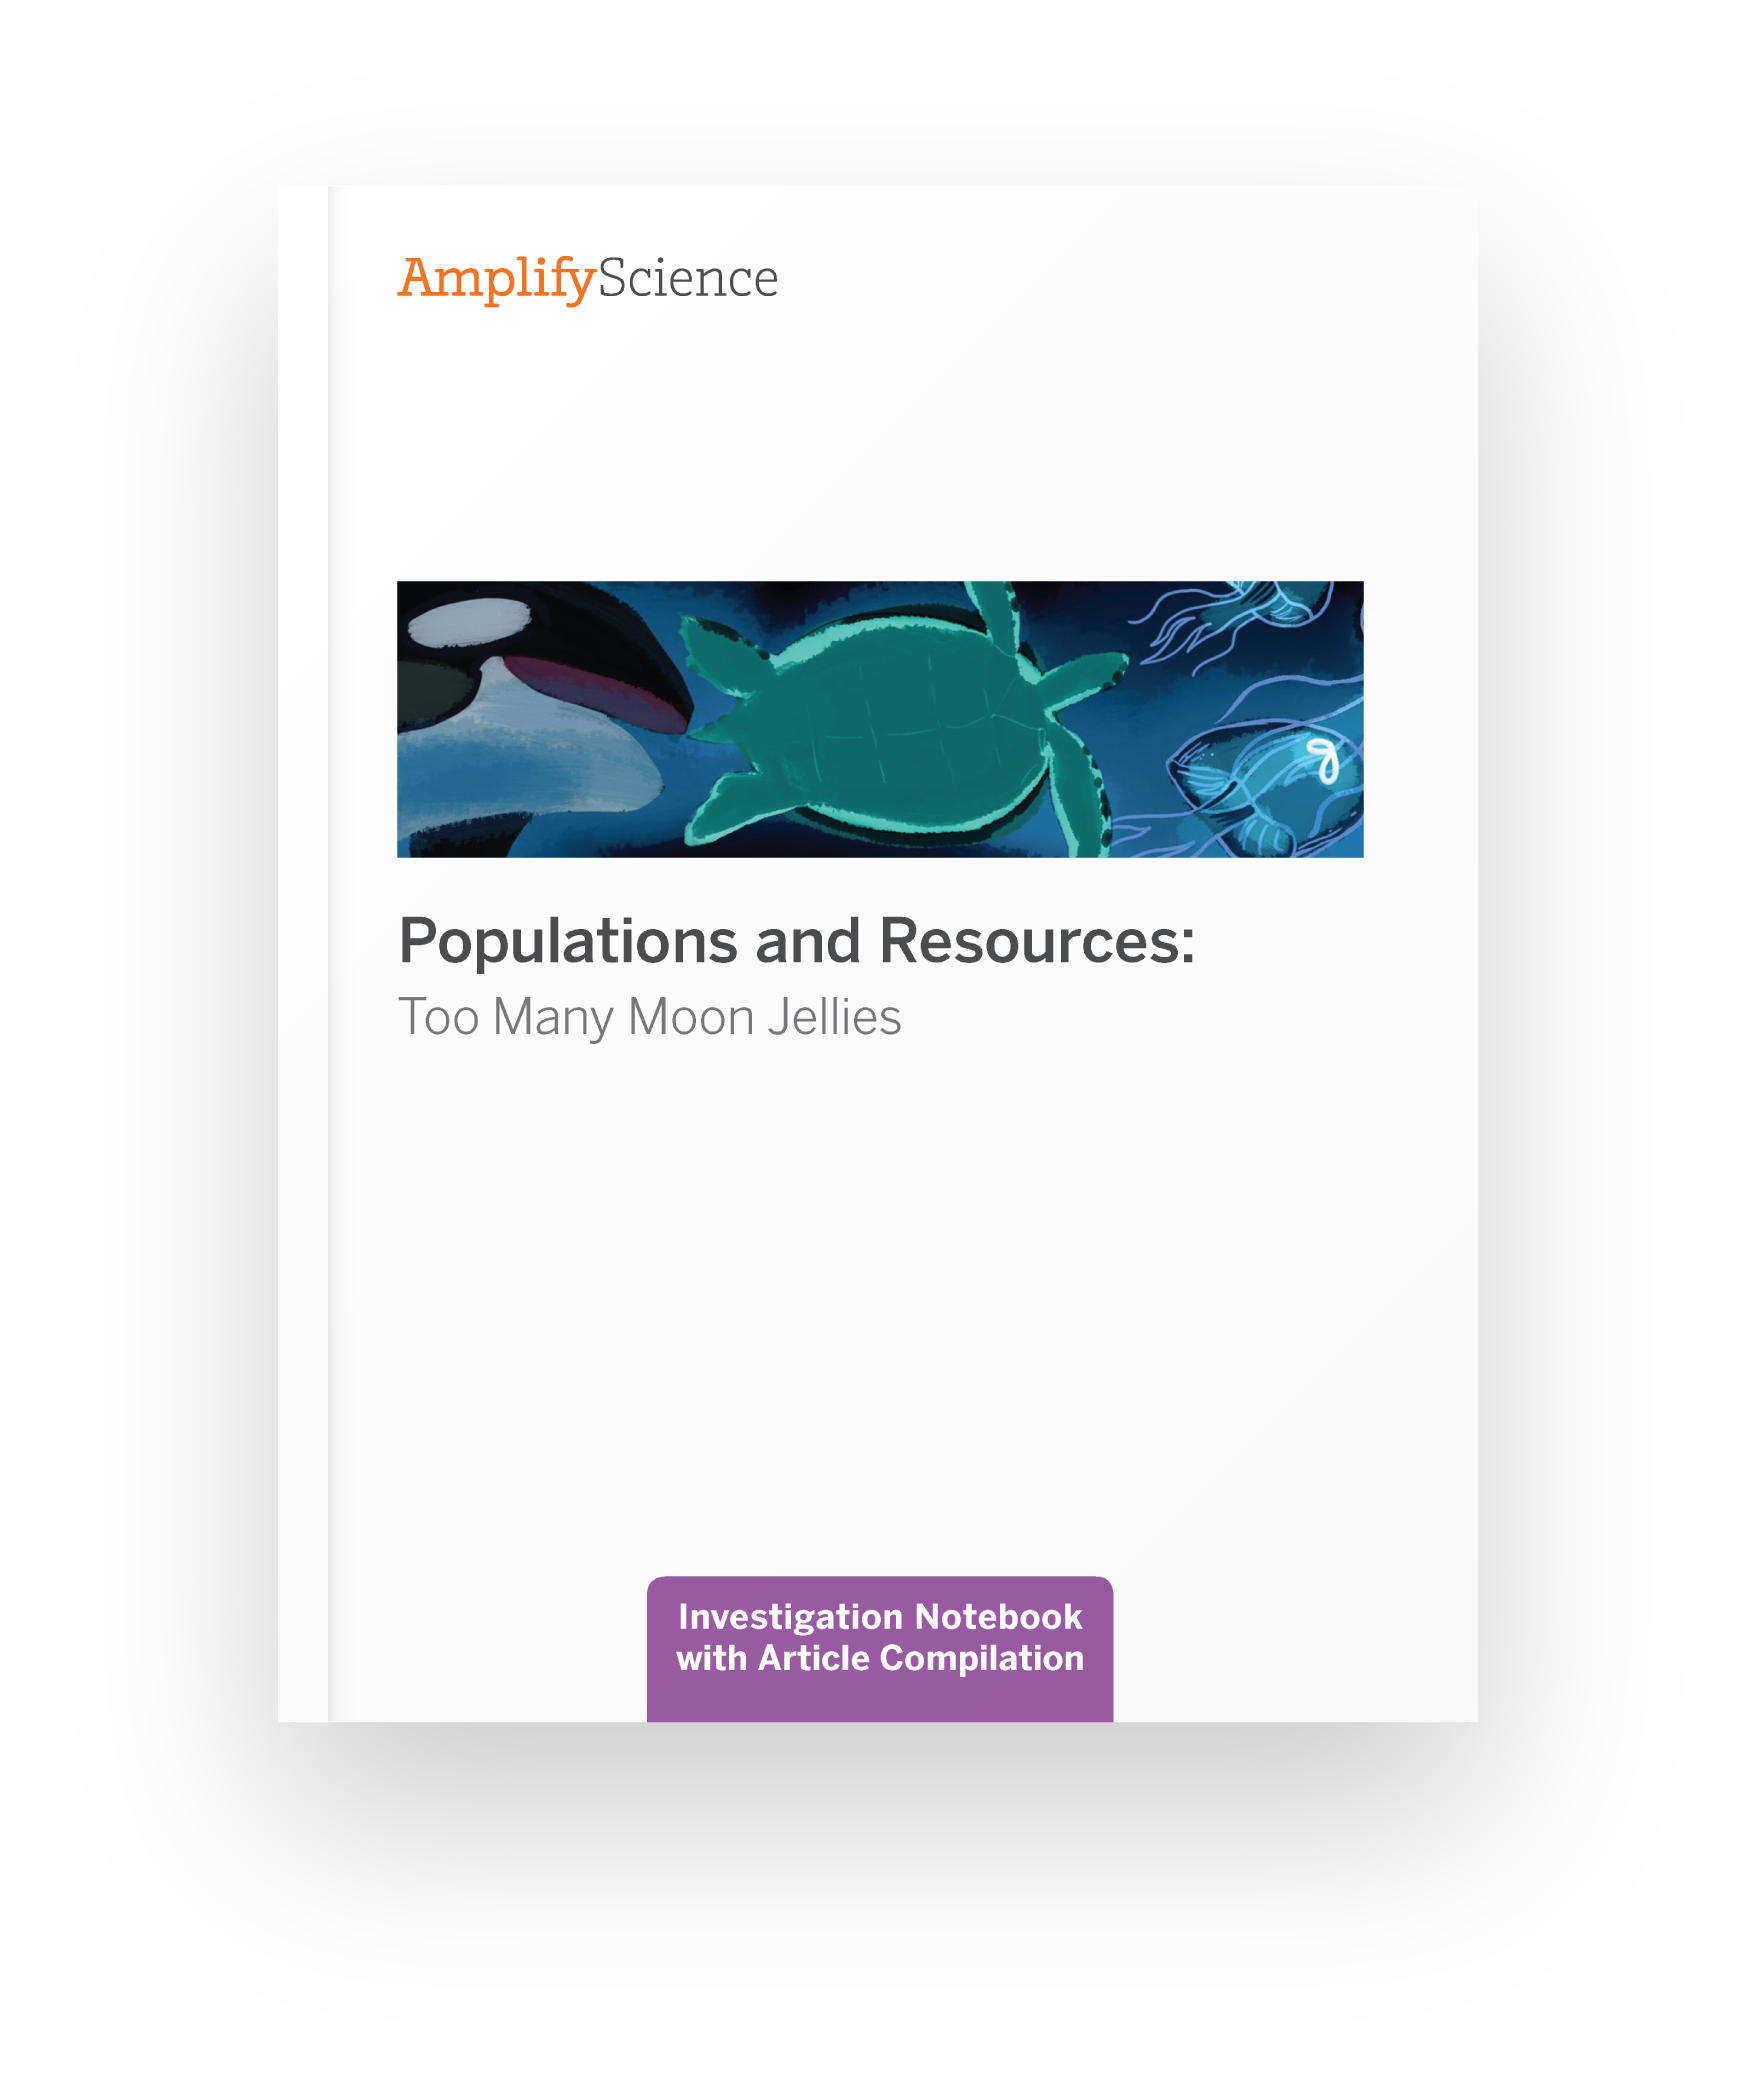 A print copy of Populations and Resources: Too Many Moon Jellies Investigation Notebook with Article Compilation